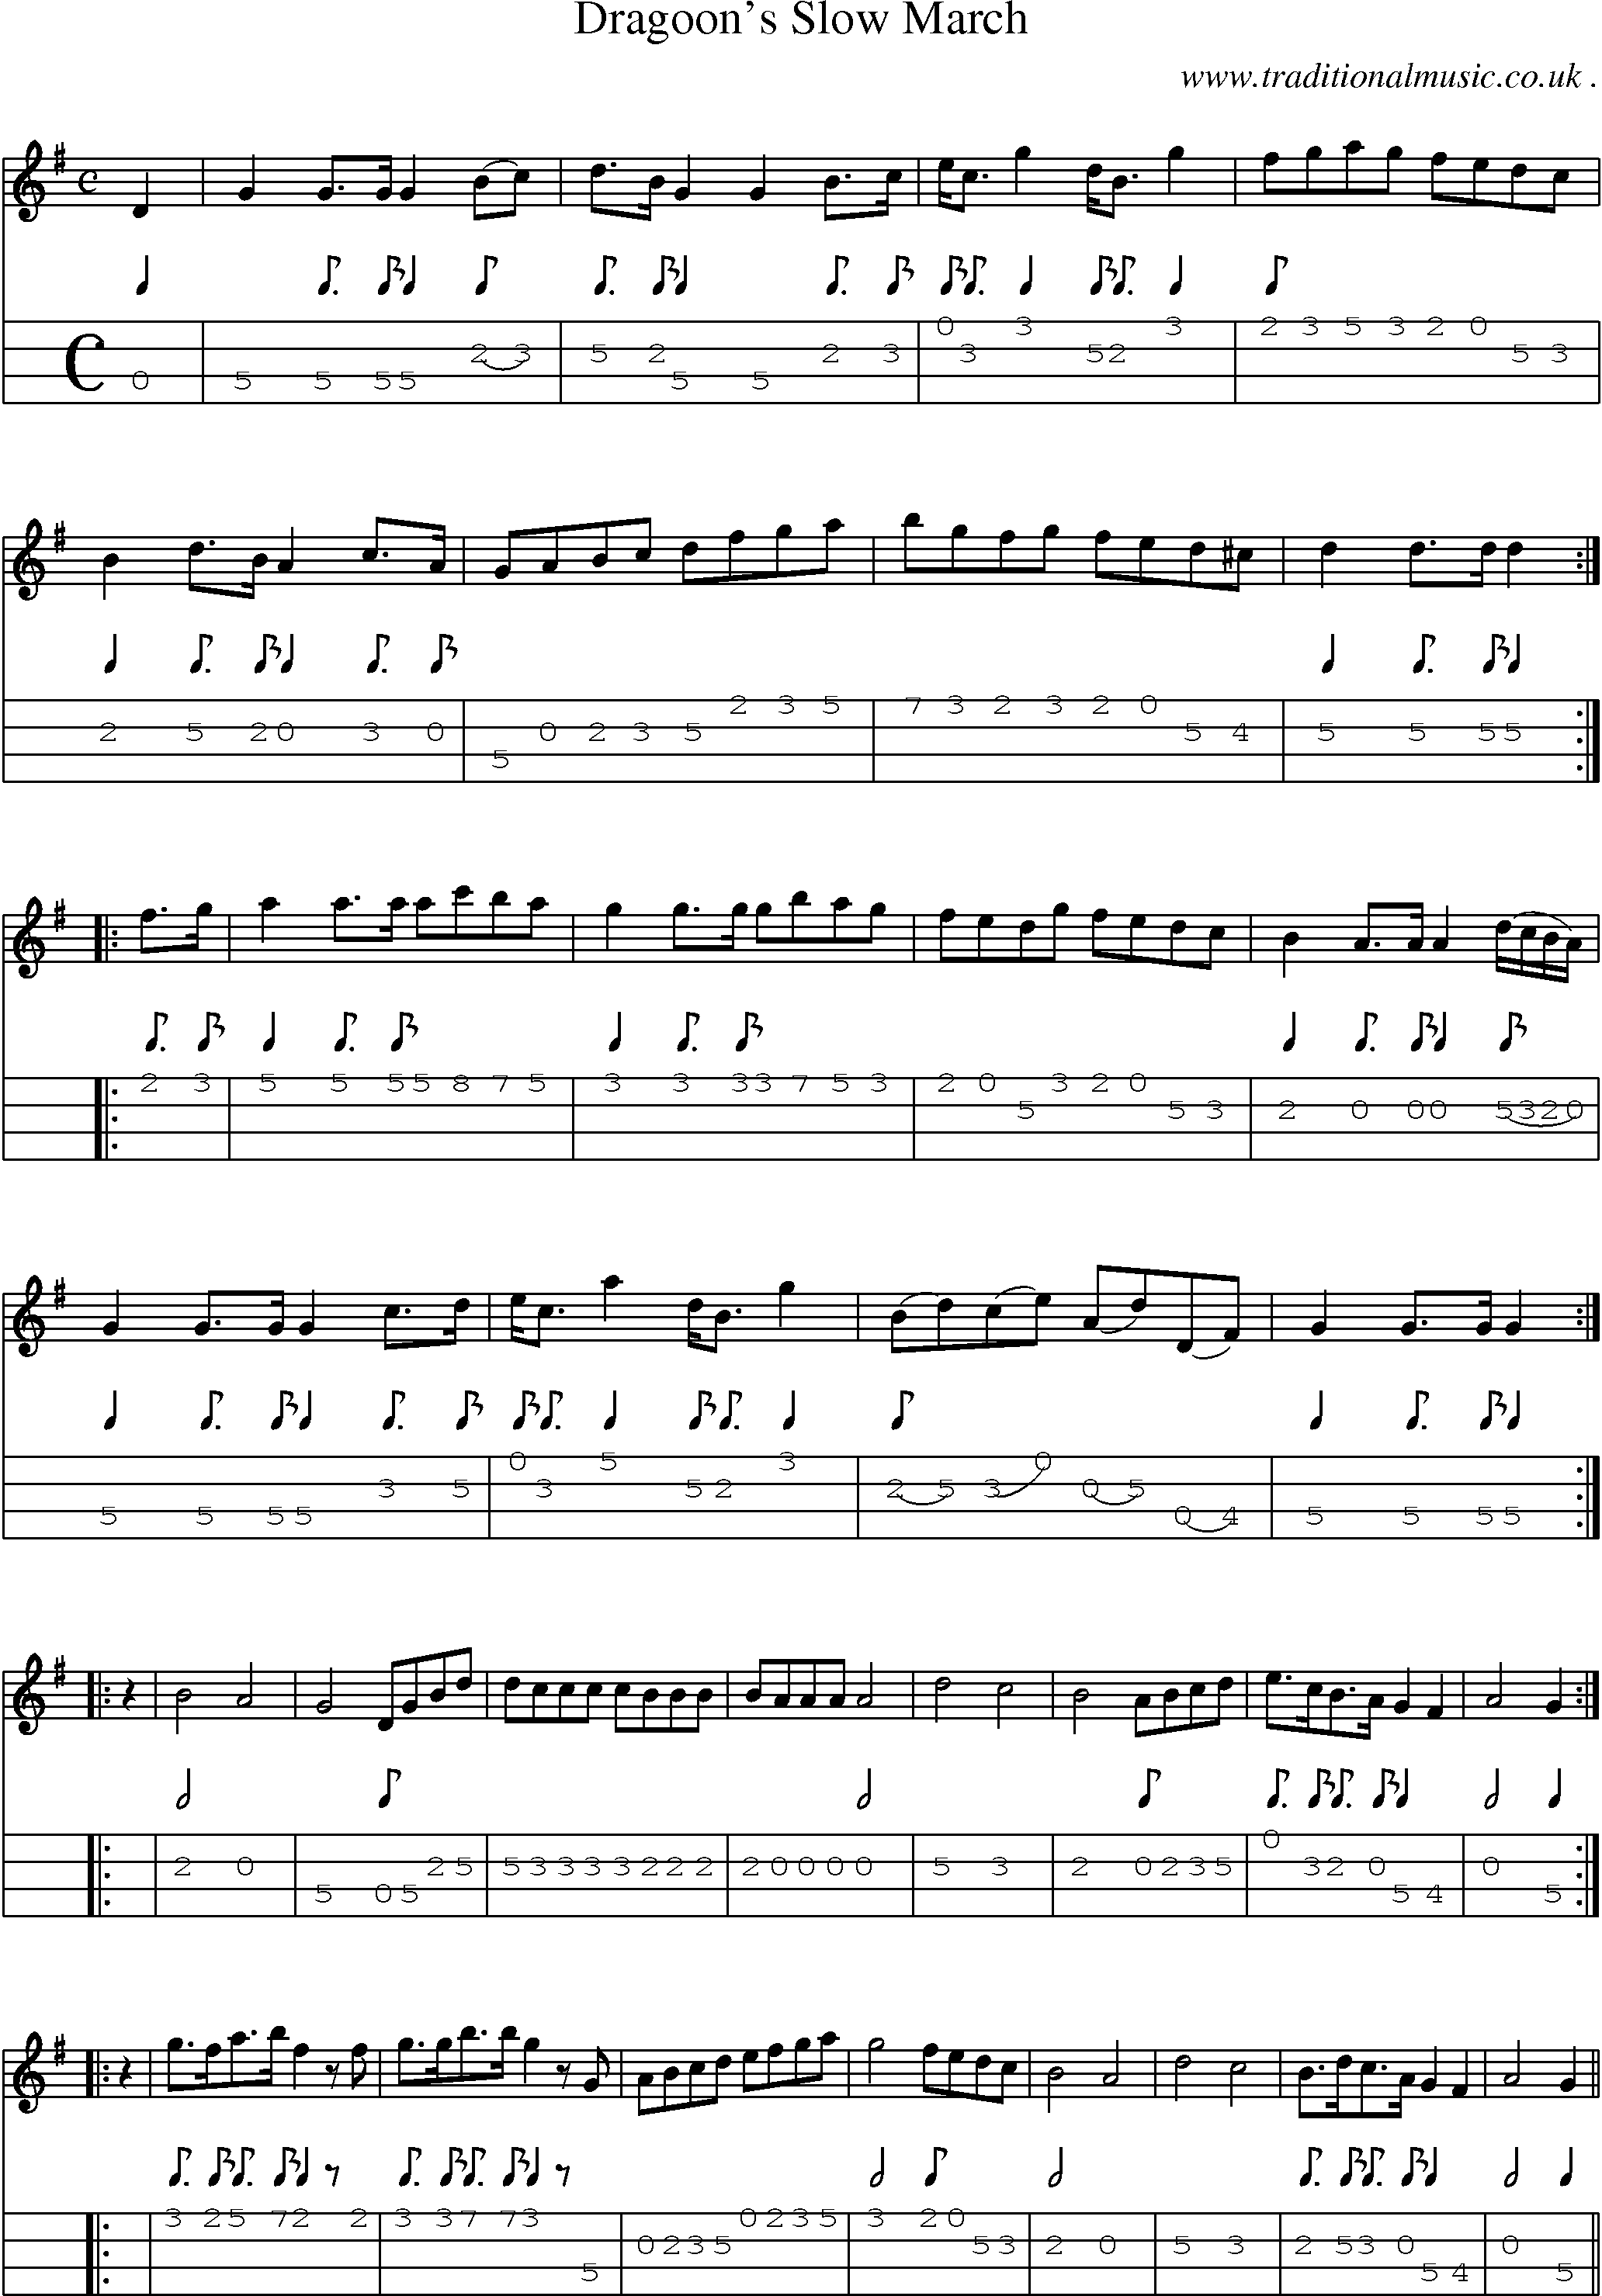 Sheet-Music and Mandolin Tabs for Dragoons Slow March